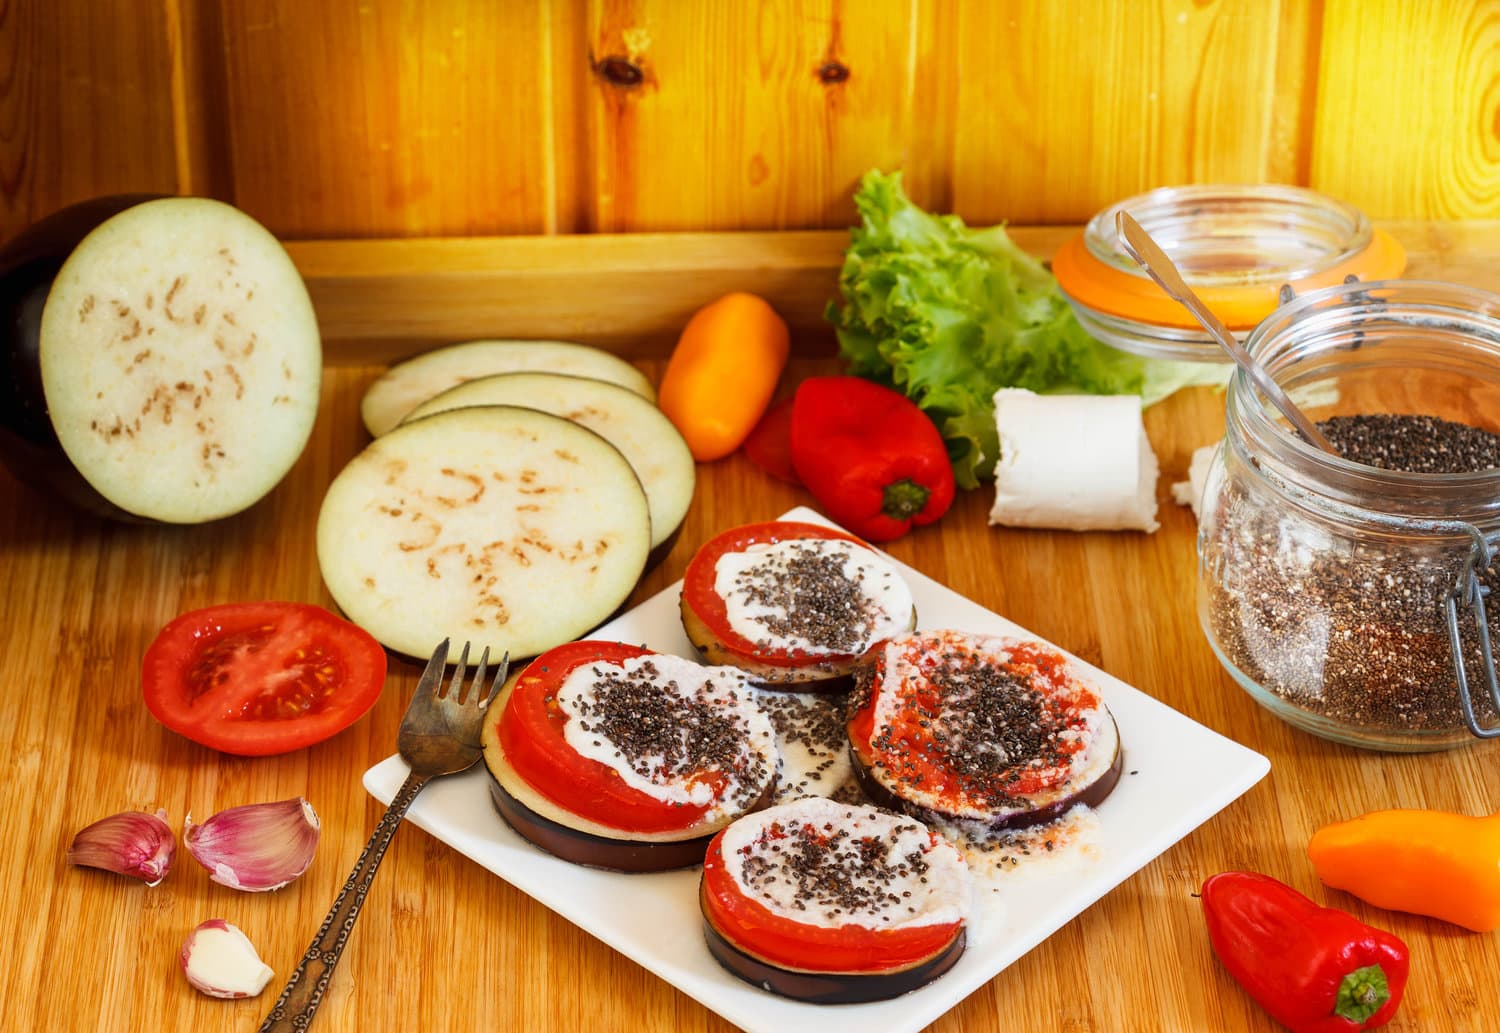 Slices of eggplant and tomatoes recipe